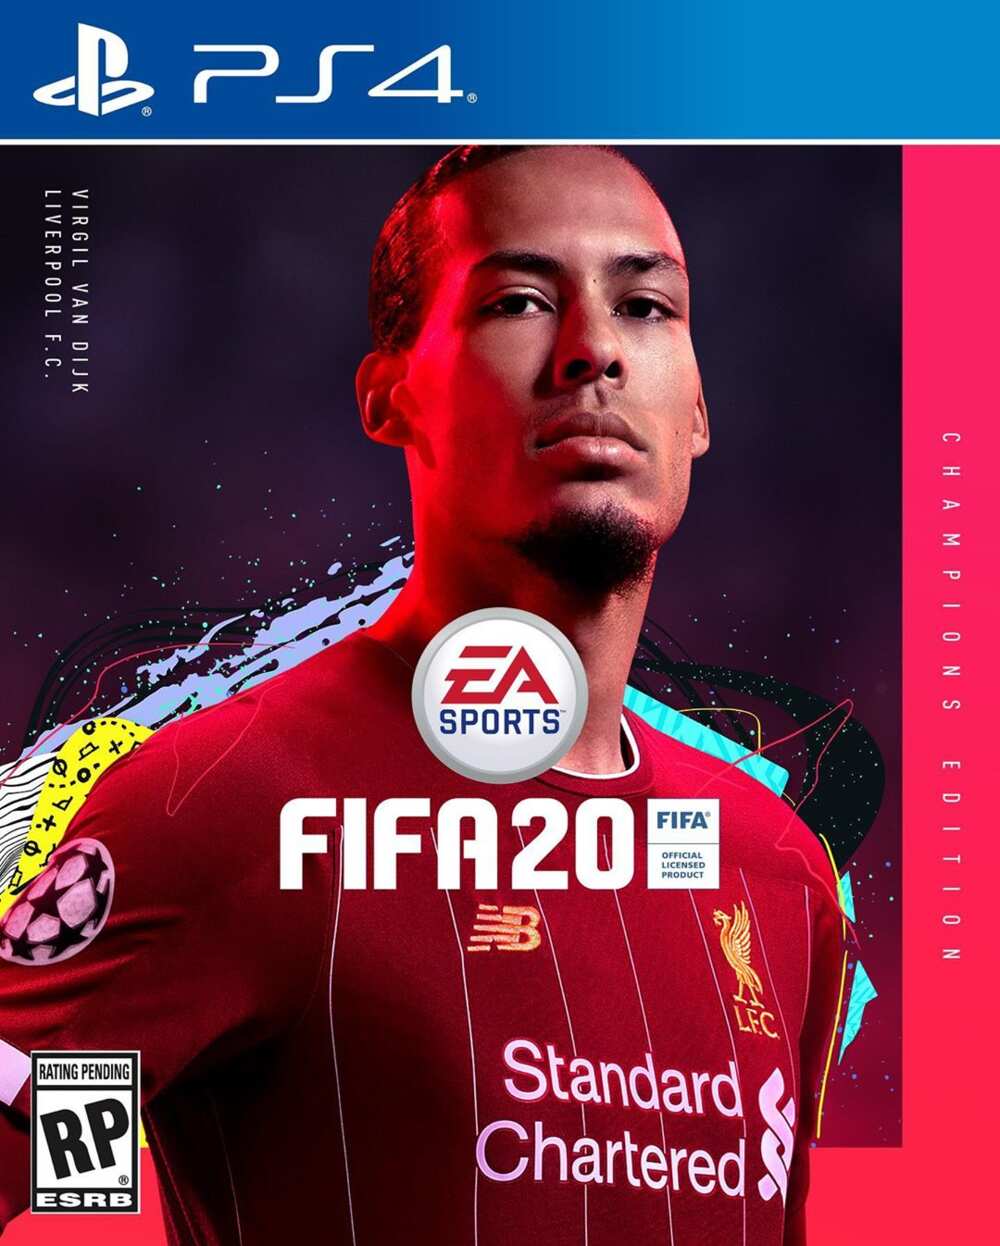 FIFA 20 expected price